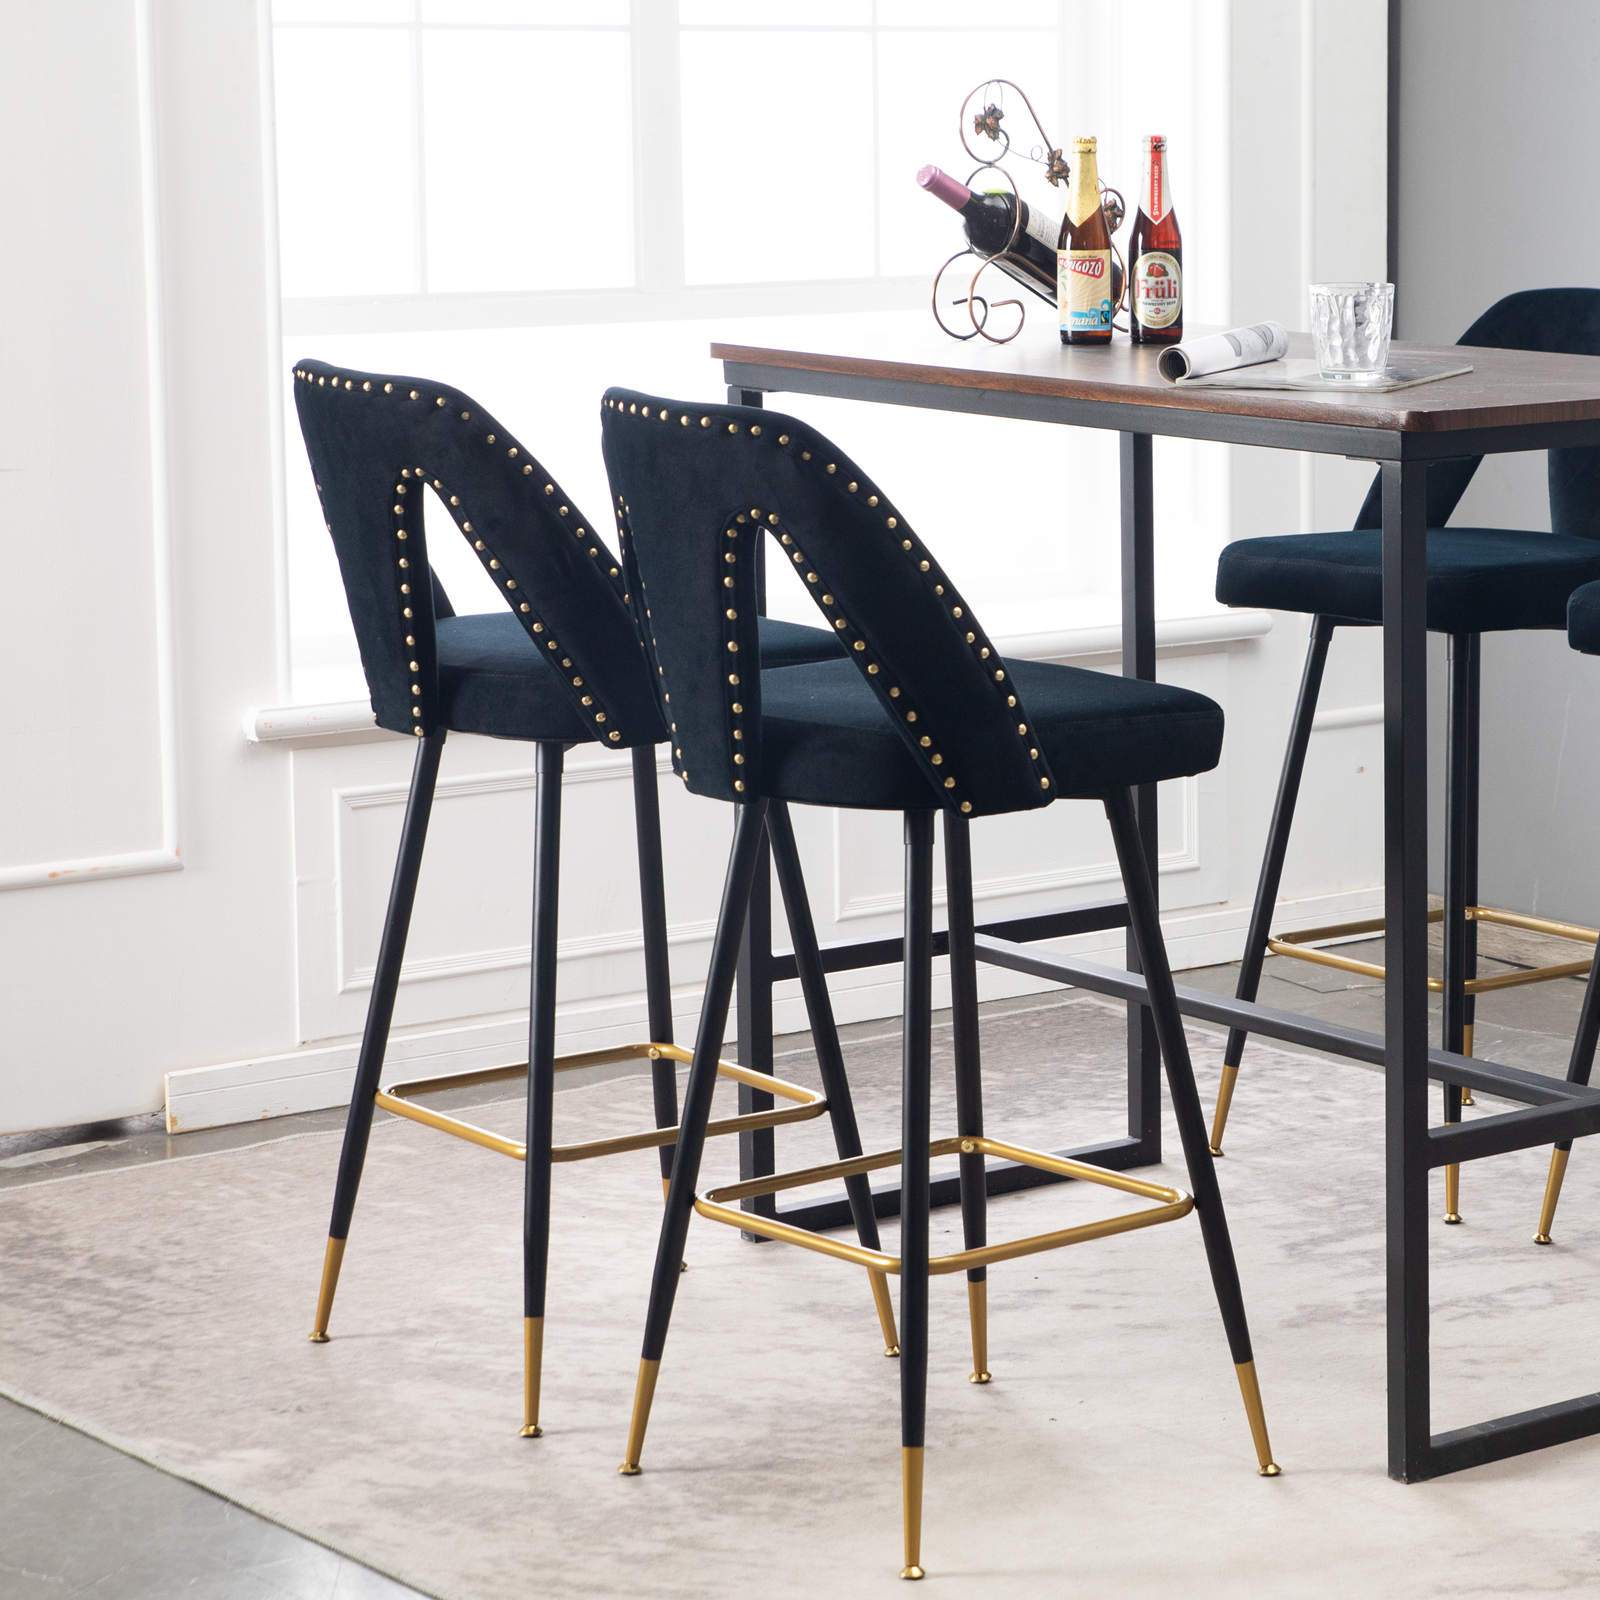 Contemporary Velvet Upholstered 28" Bar Stool with Nail-heads and Gold Tipped Black Metal Legs,Set of 2